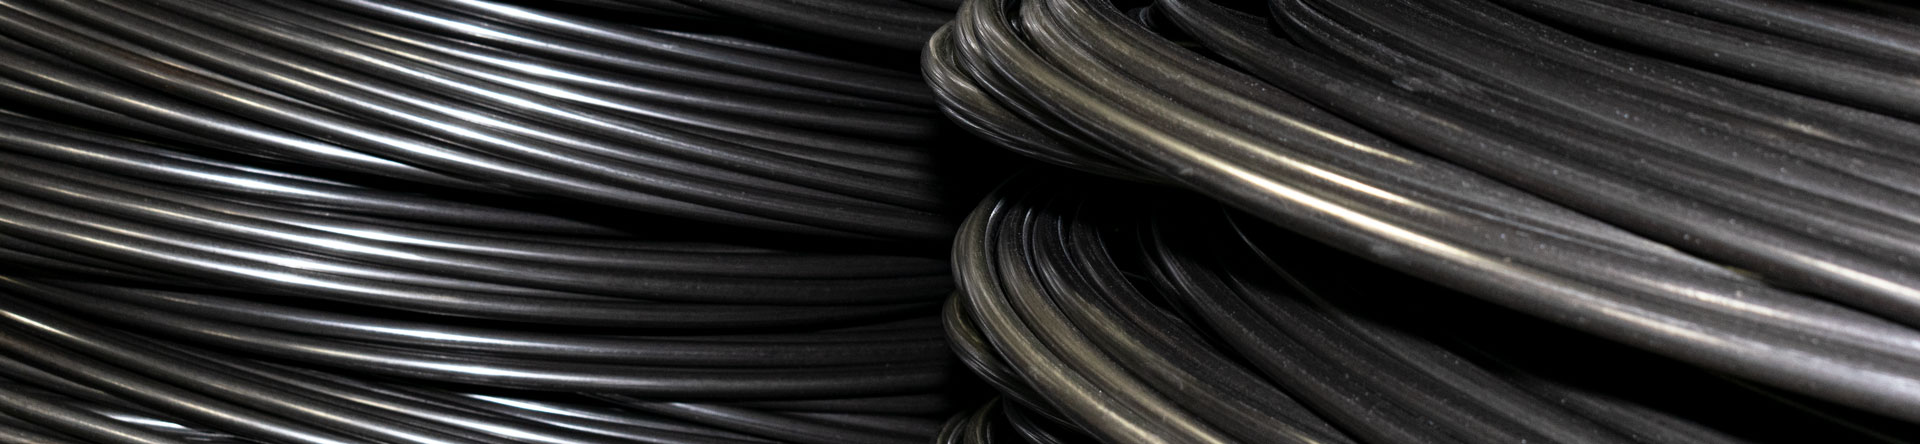 Bright Annealed Industrial Wire Closeup